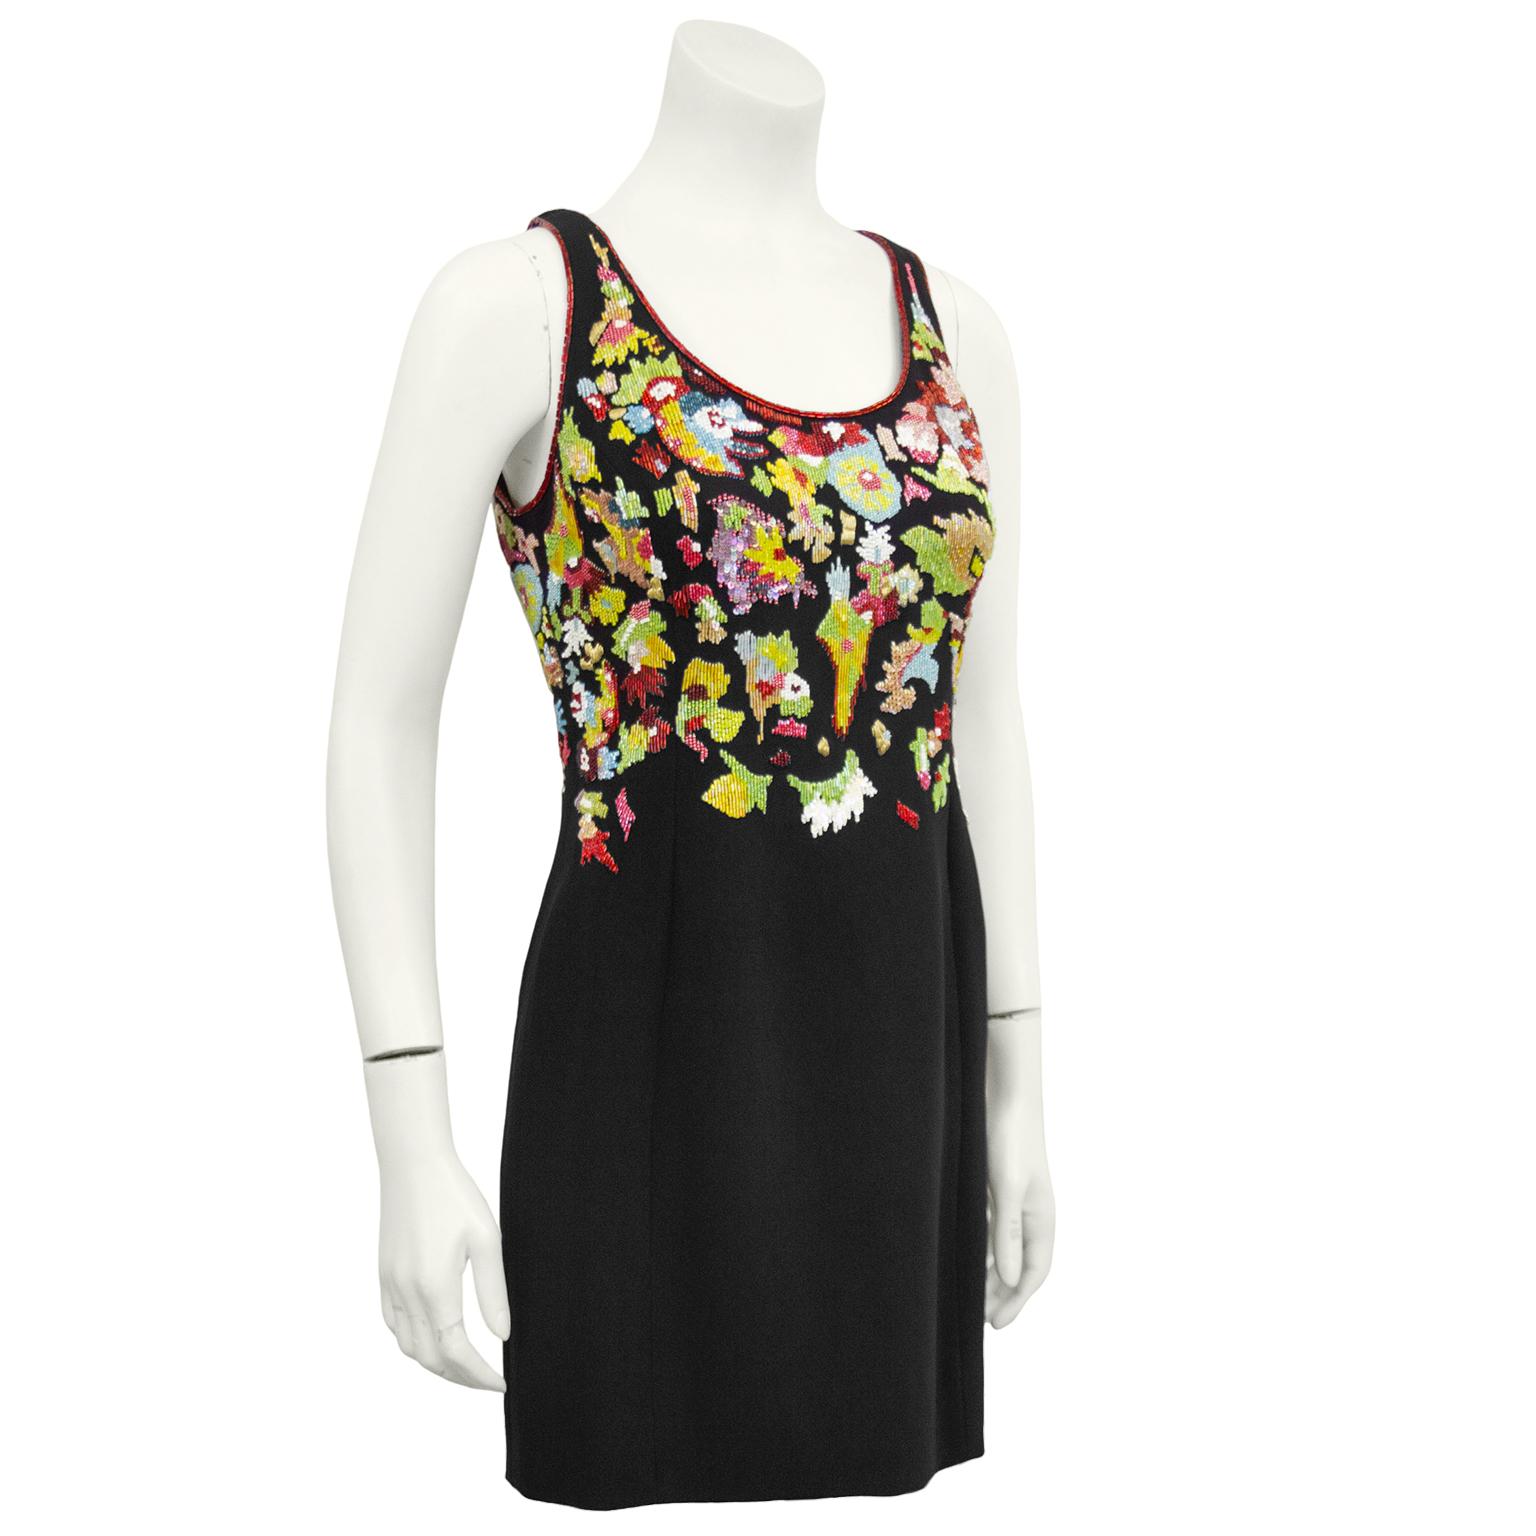 1990's Karl Lagerfeld sleeveless cocktail mini dress with fabulous beading throughout. Necklace and sleeves trimmed in red beading. Deconstructed abstract green, red, yellow, blue and purple hand beaded florals on front and back of bodice. Skirt is